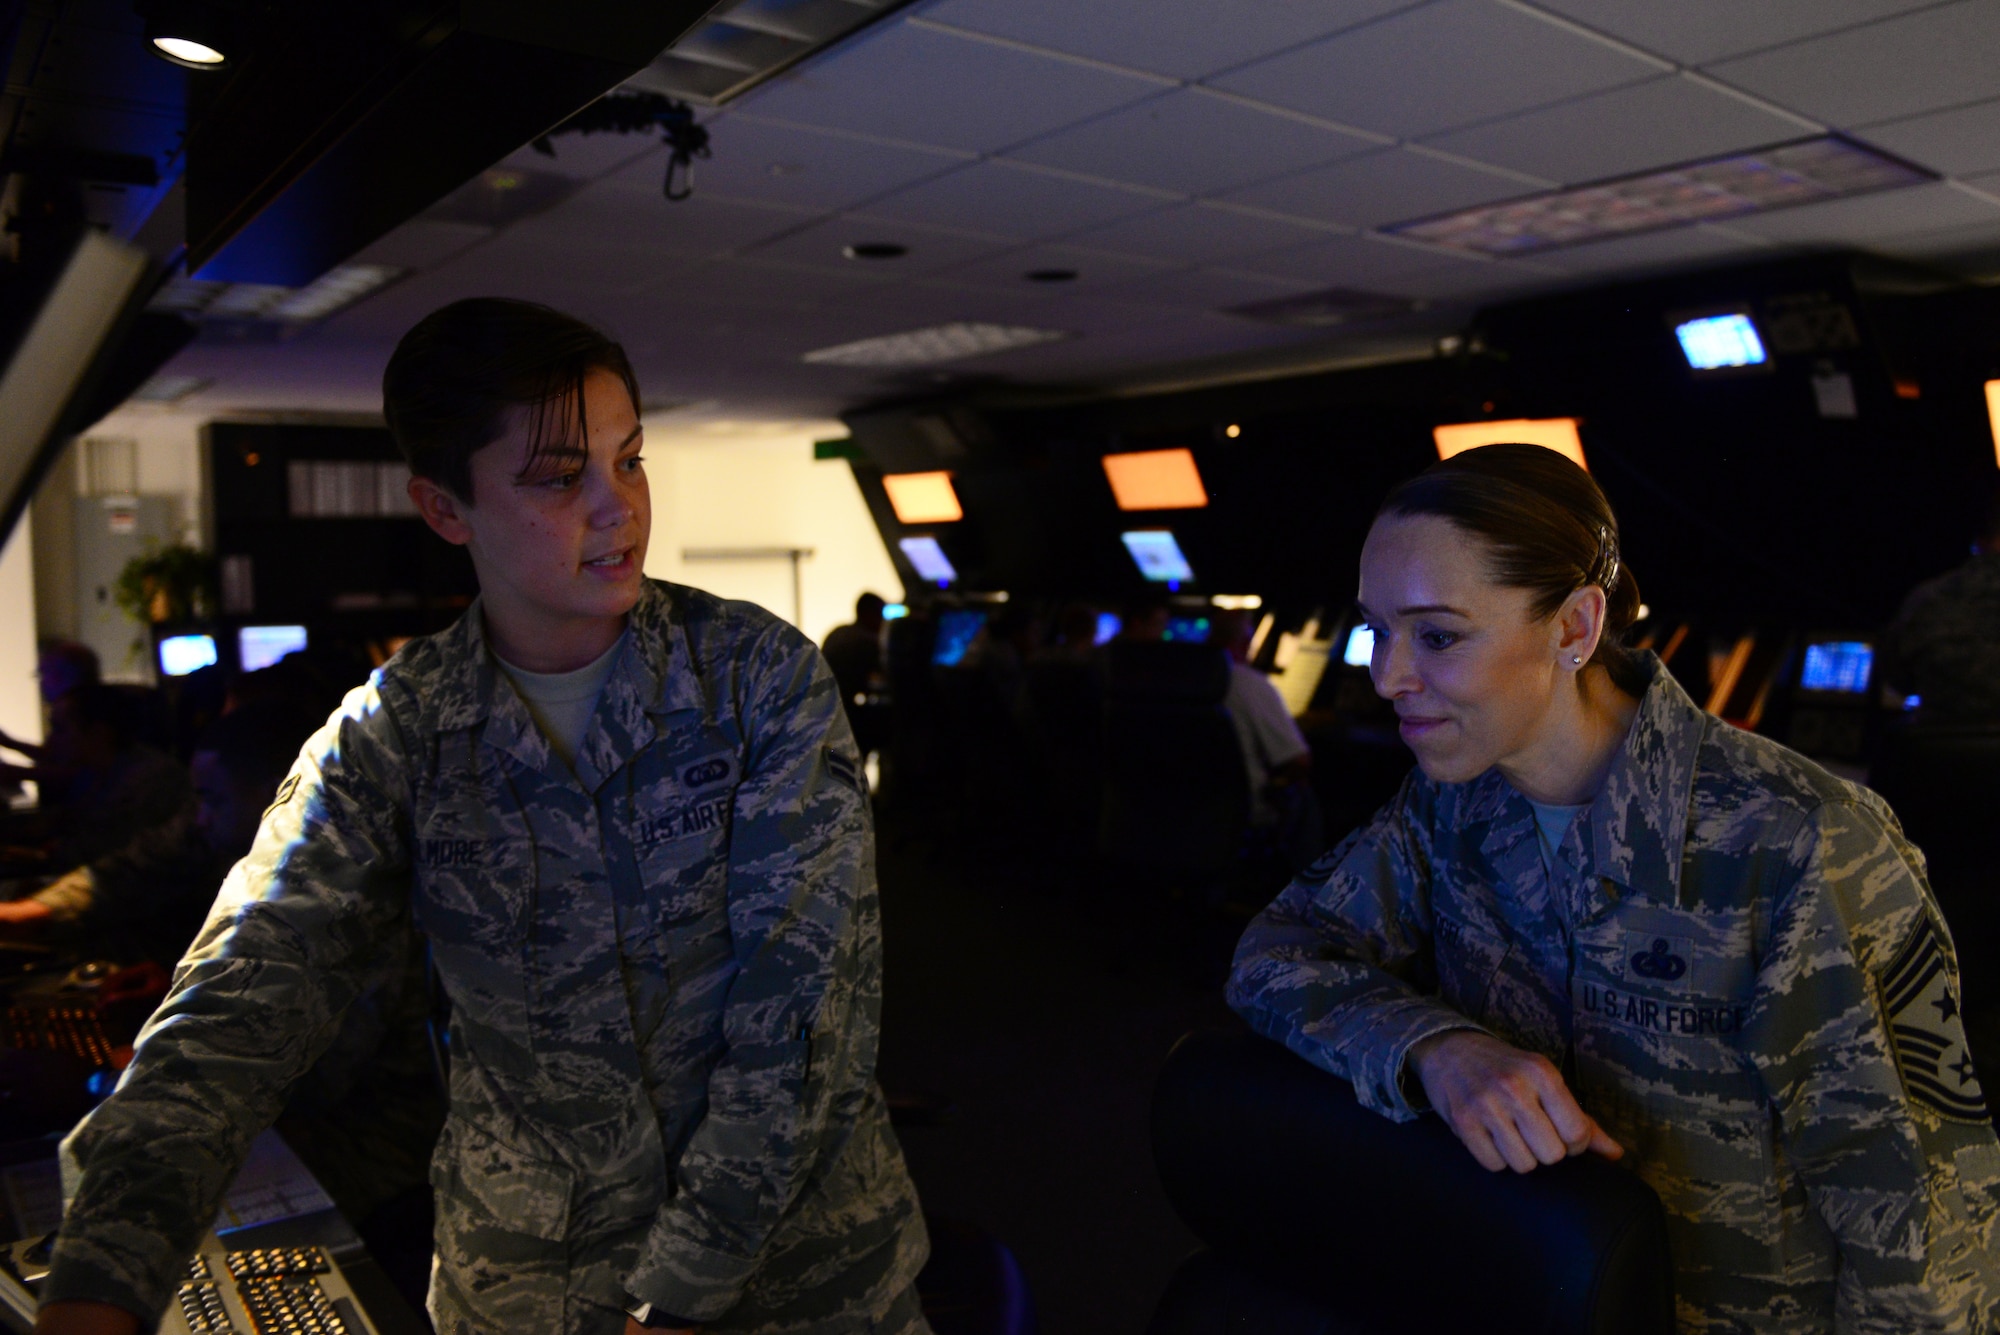 U.S. Air Force Airman 1st Class Jaiden Elmore, 14th Operations Support Squadron air traffic controller, shows Chief Master Sgt. Juliet Gudgel, command chief of Air Education and Training Command, what Airmen in the Radar Approach Control do on a daily basis at Columbus Air Force Base, Mississippi, June 21, 2018. Columbus AFB has the busiest airspace in AETC, flying over 300 sorties per day. (U.S. Air Force photo by Airman 1st Class Beaux Hebert)